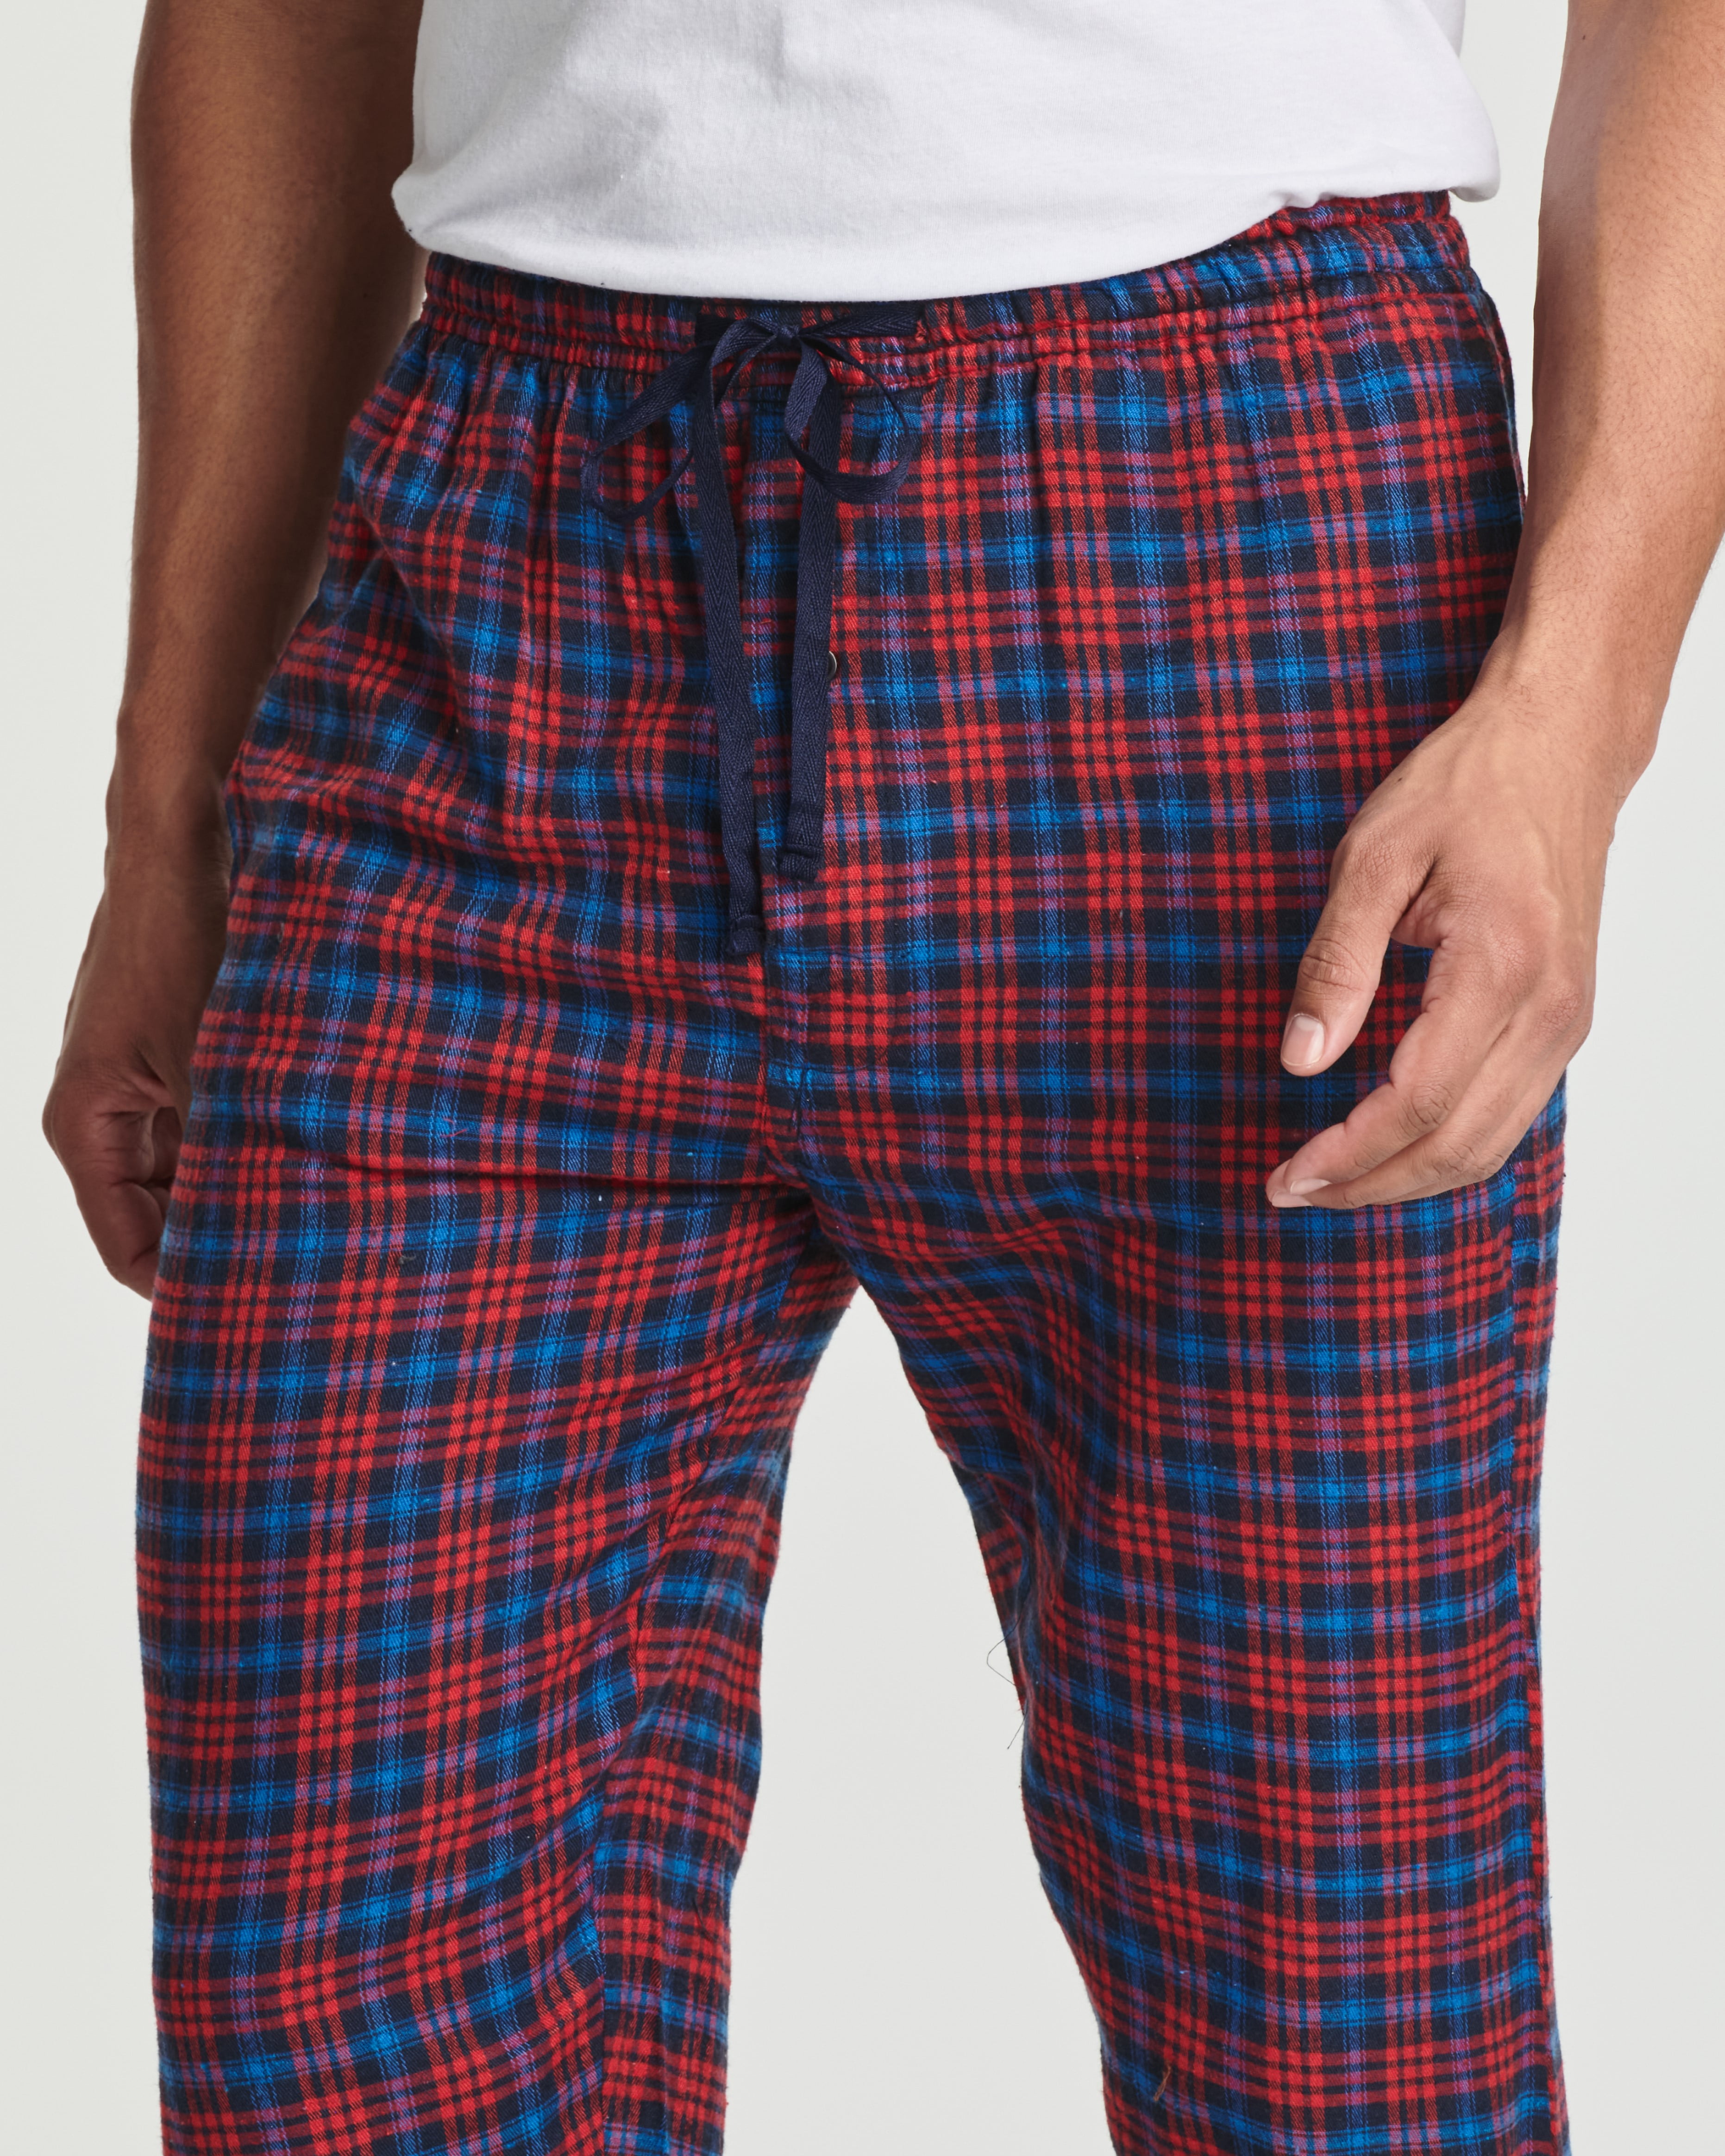 3 Pack - Flannel Pajama Pant Pajama Bottoms-100% Cotton Yarn-dye Woven  (SMALL, Combo A. (Grey, Blue, Red)) at  Men's Clothing store